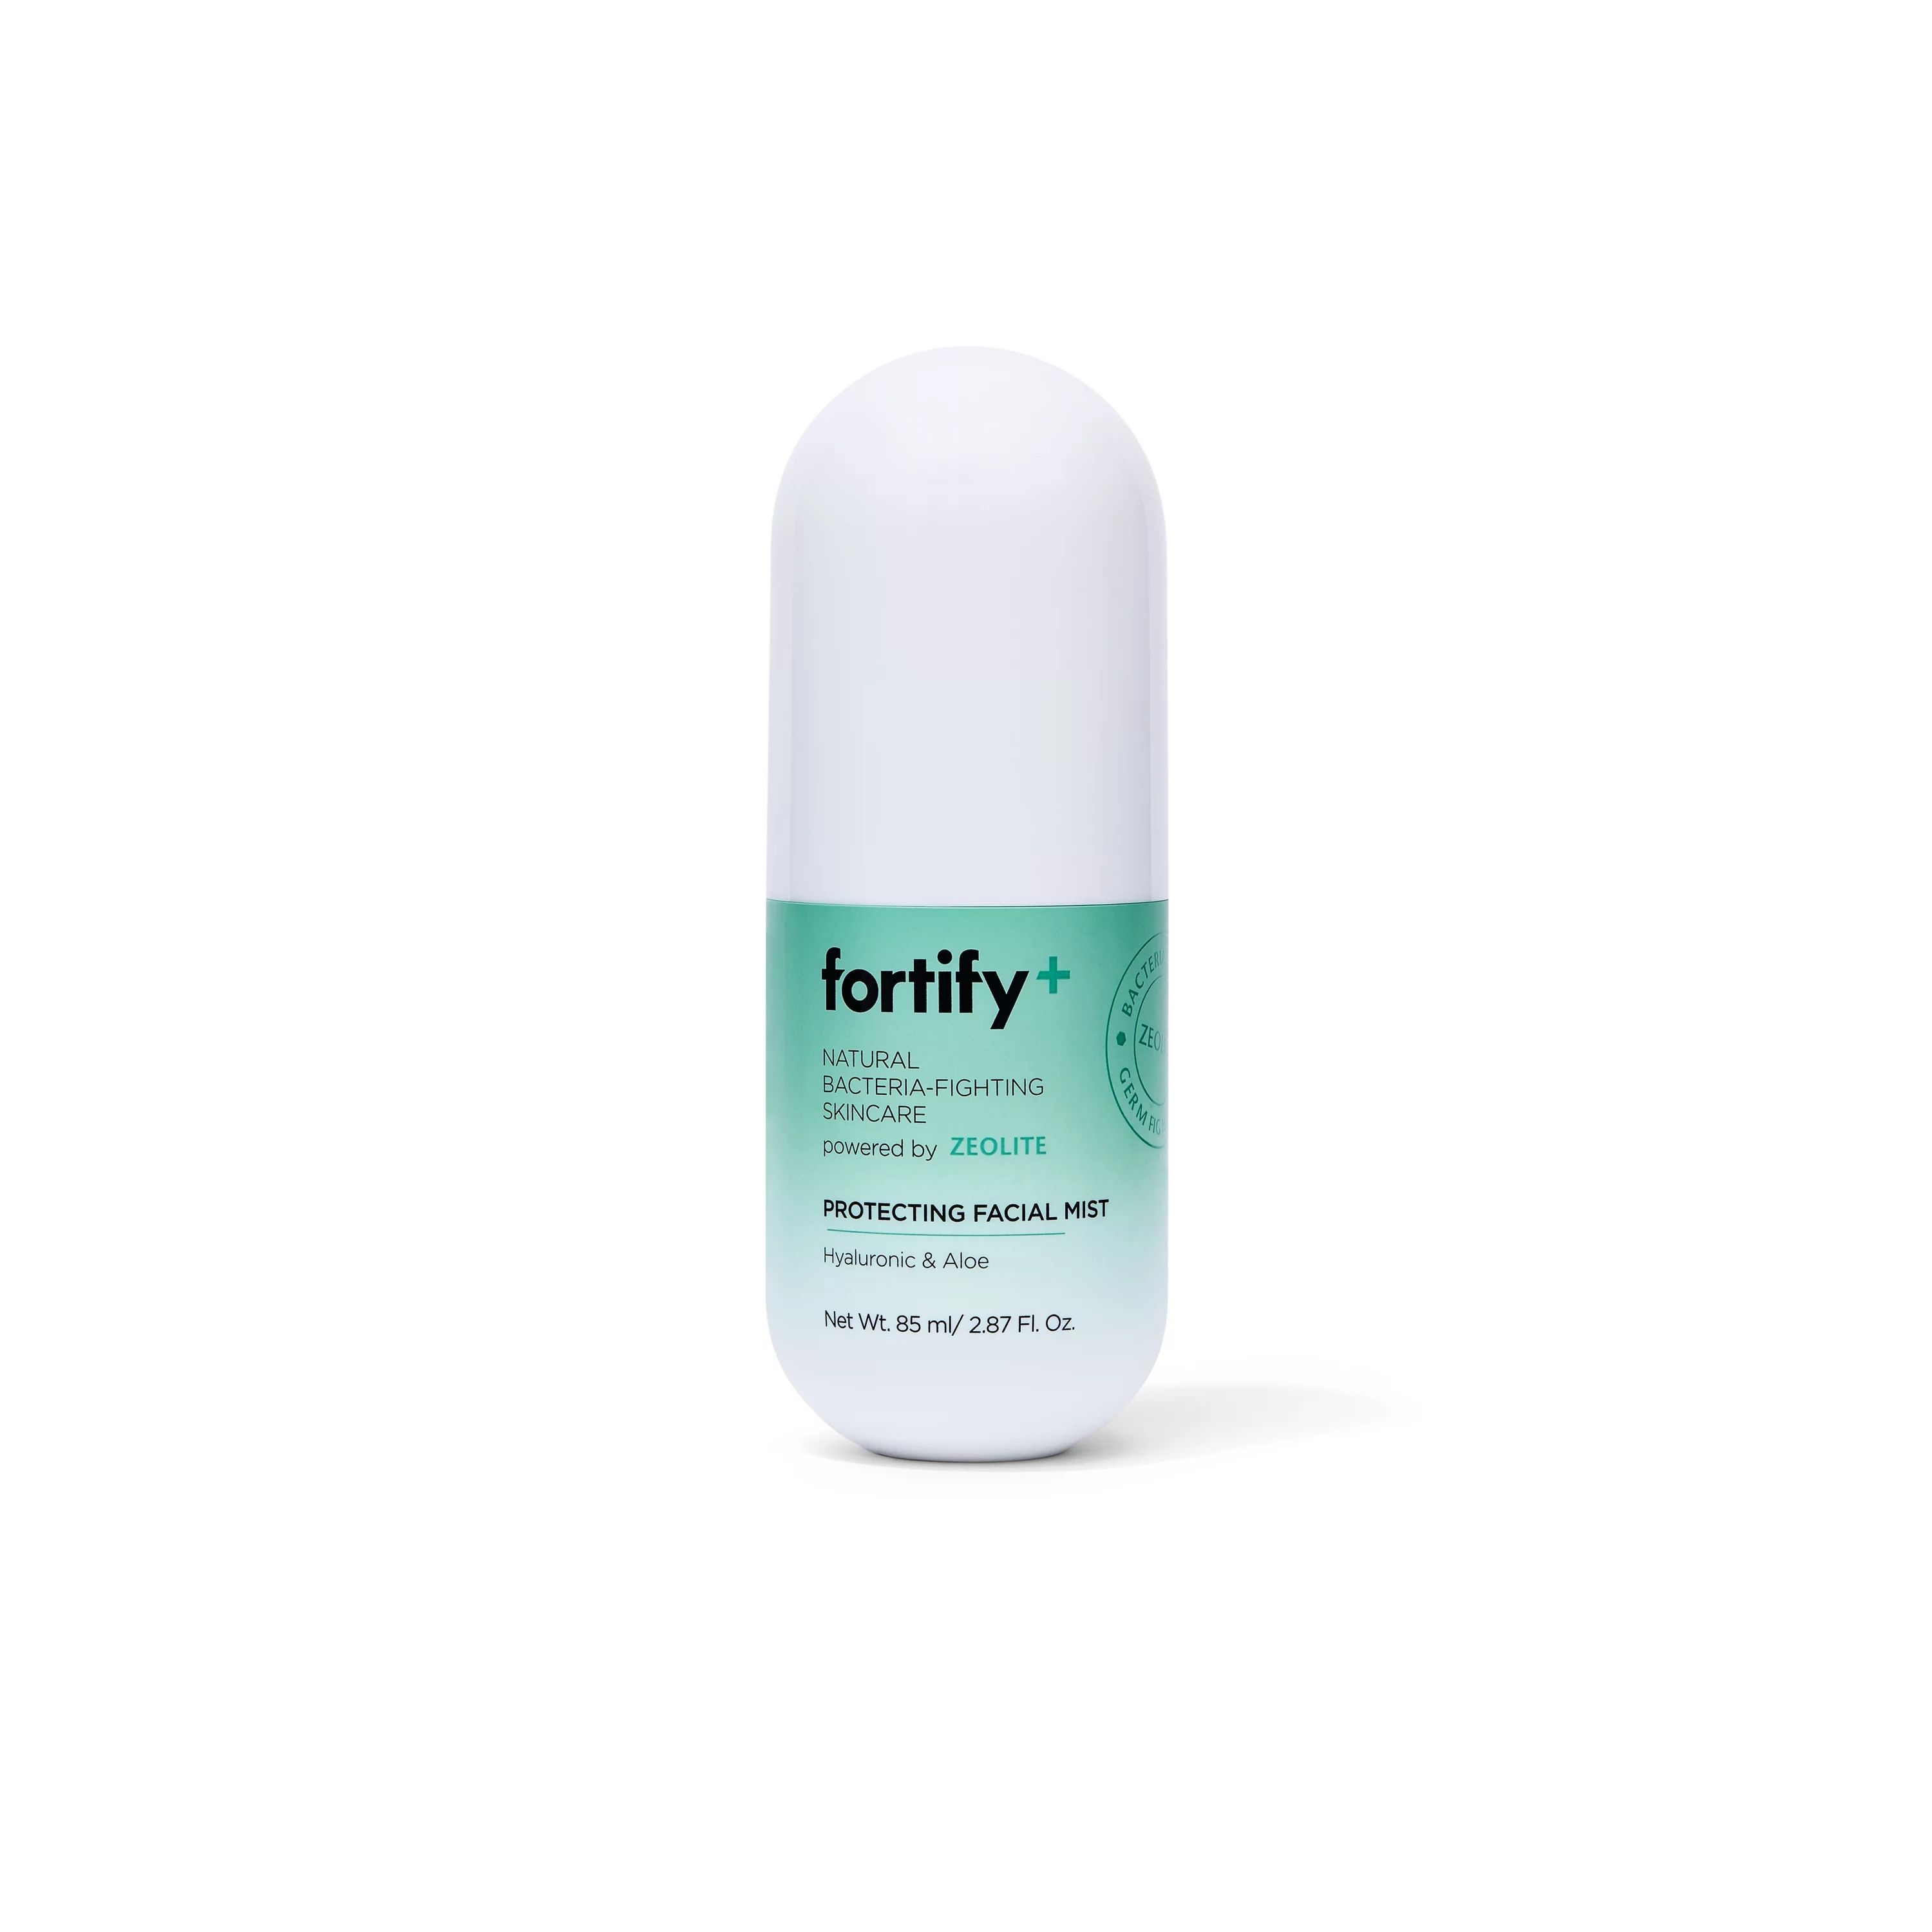 Fortify + Natural Germ-Fighting Skincare, Protecting Facial Mist - Travel Capsule W/ Hyaluronic A... | Walmart (US)